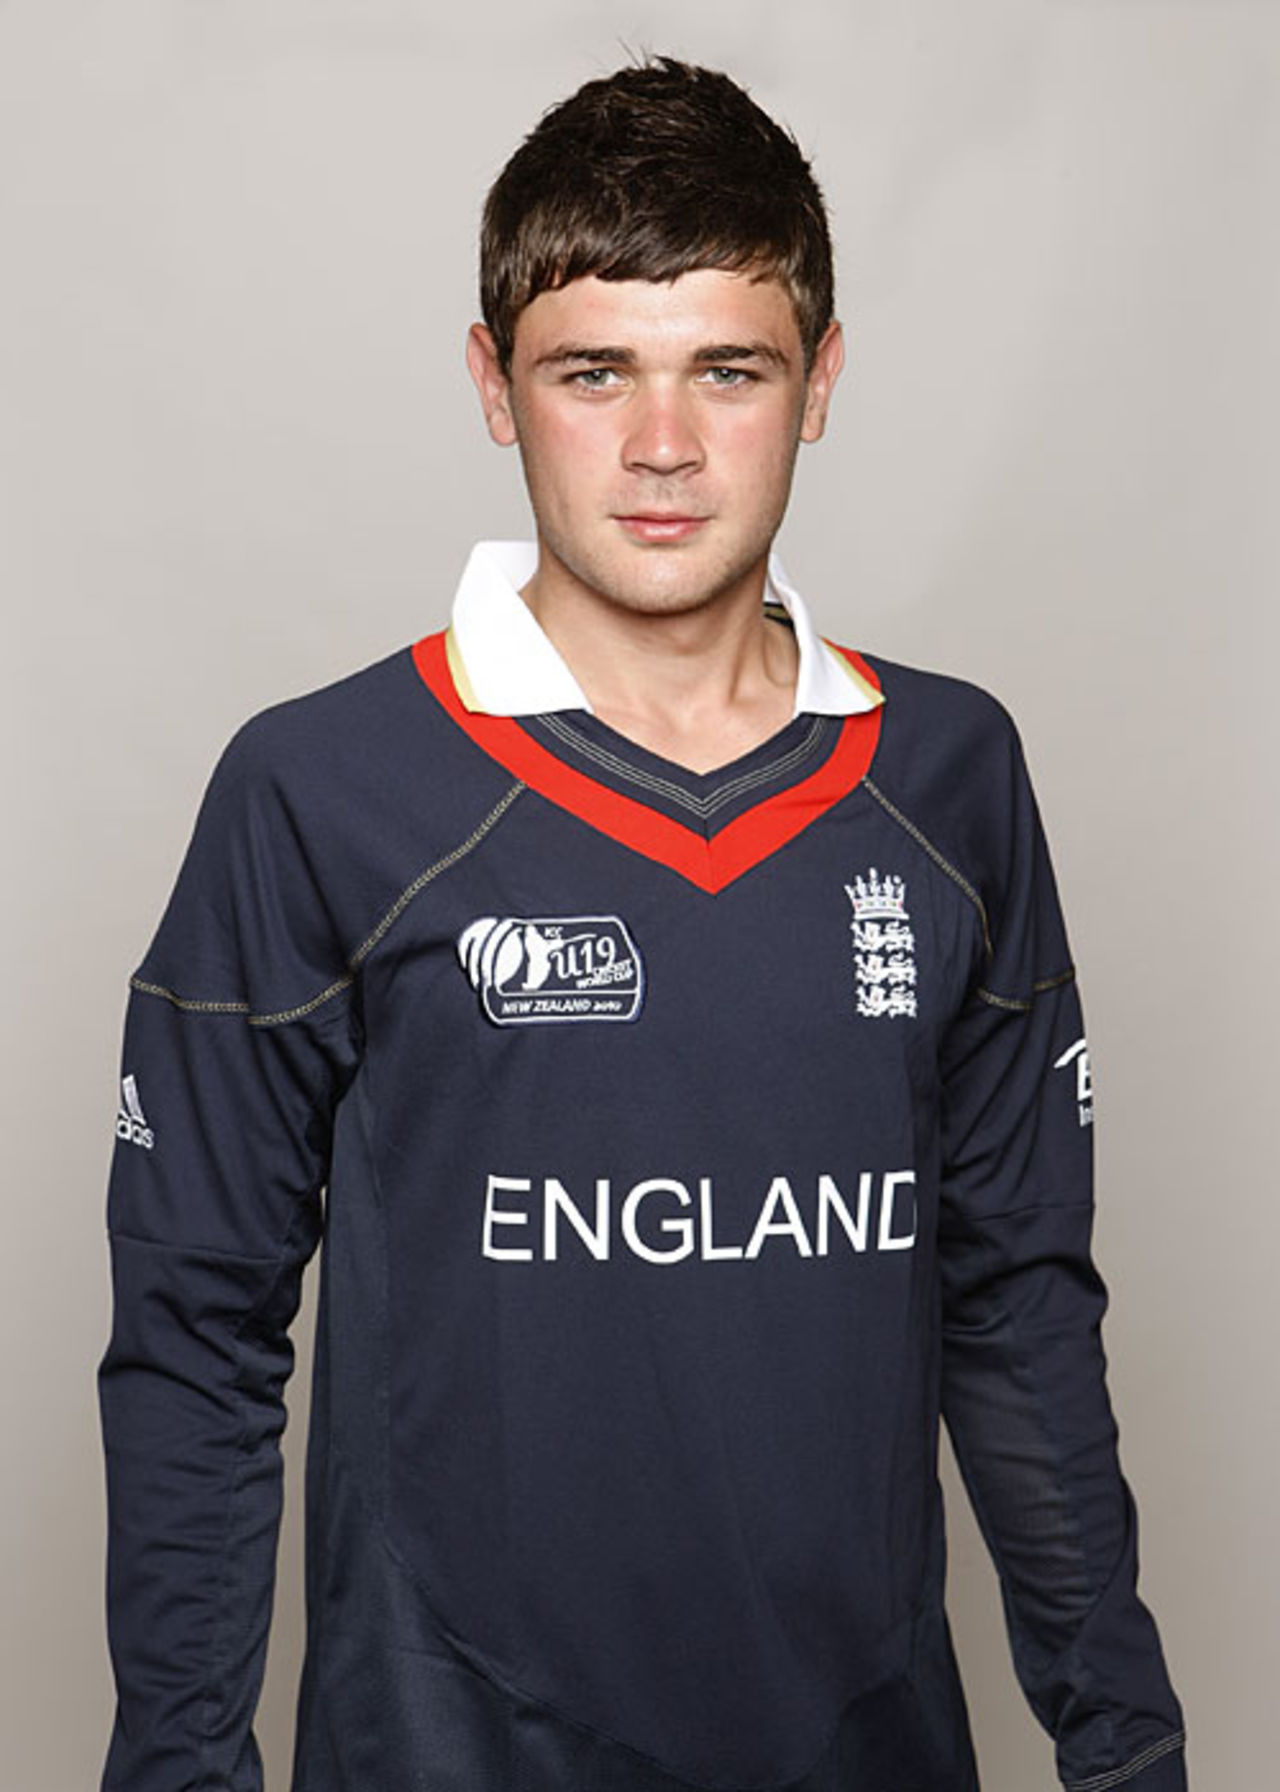 Nathan Buck at the Under-19 World Cup, January 2010